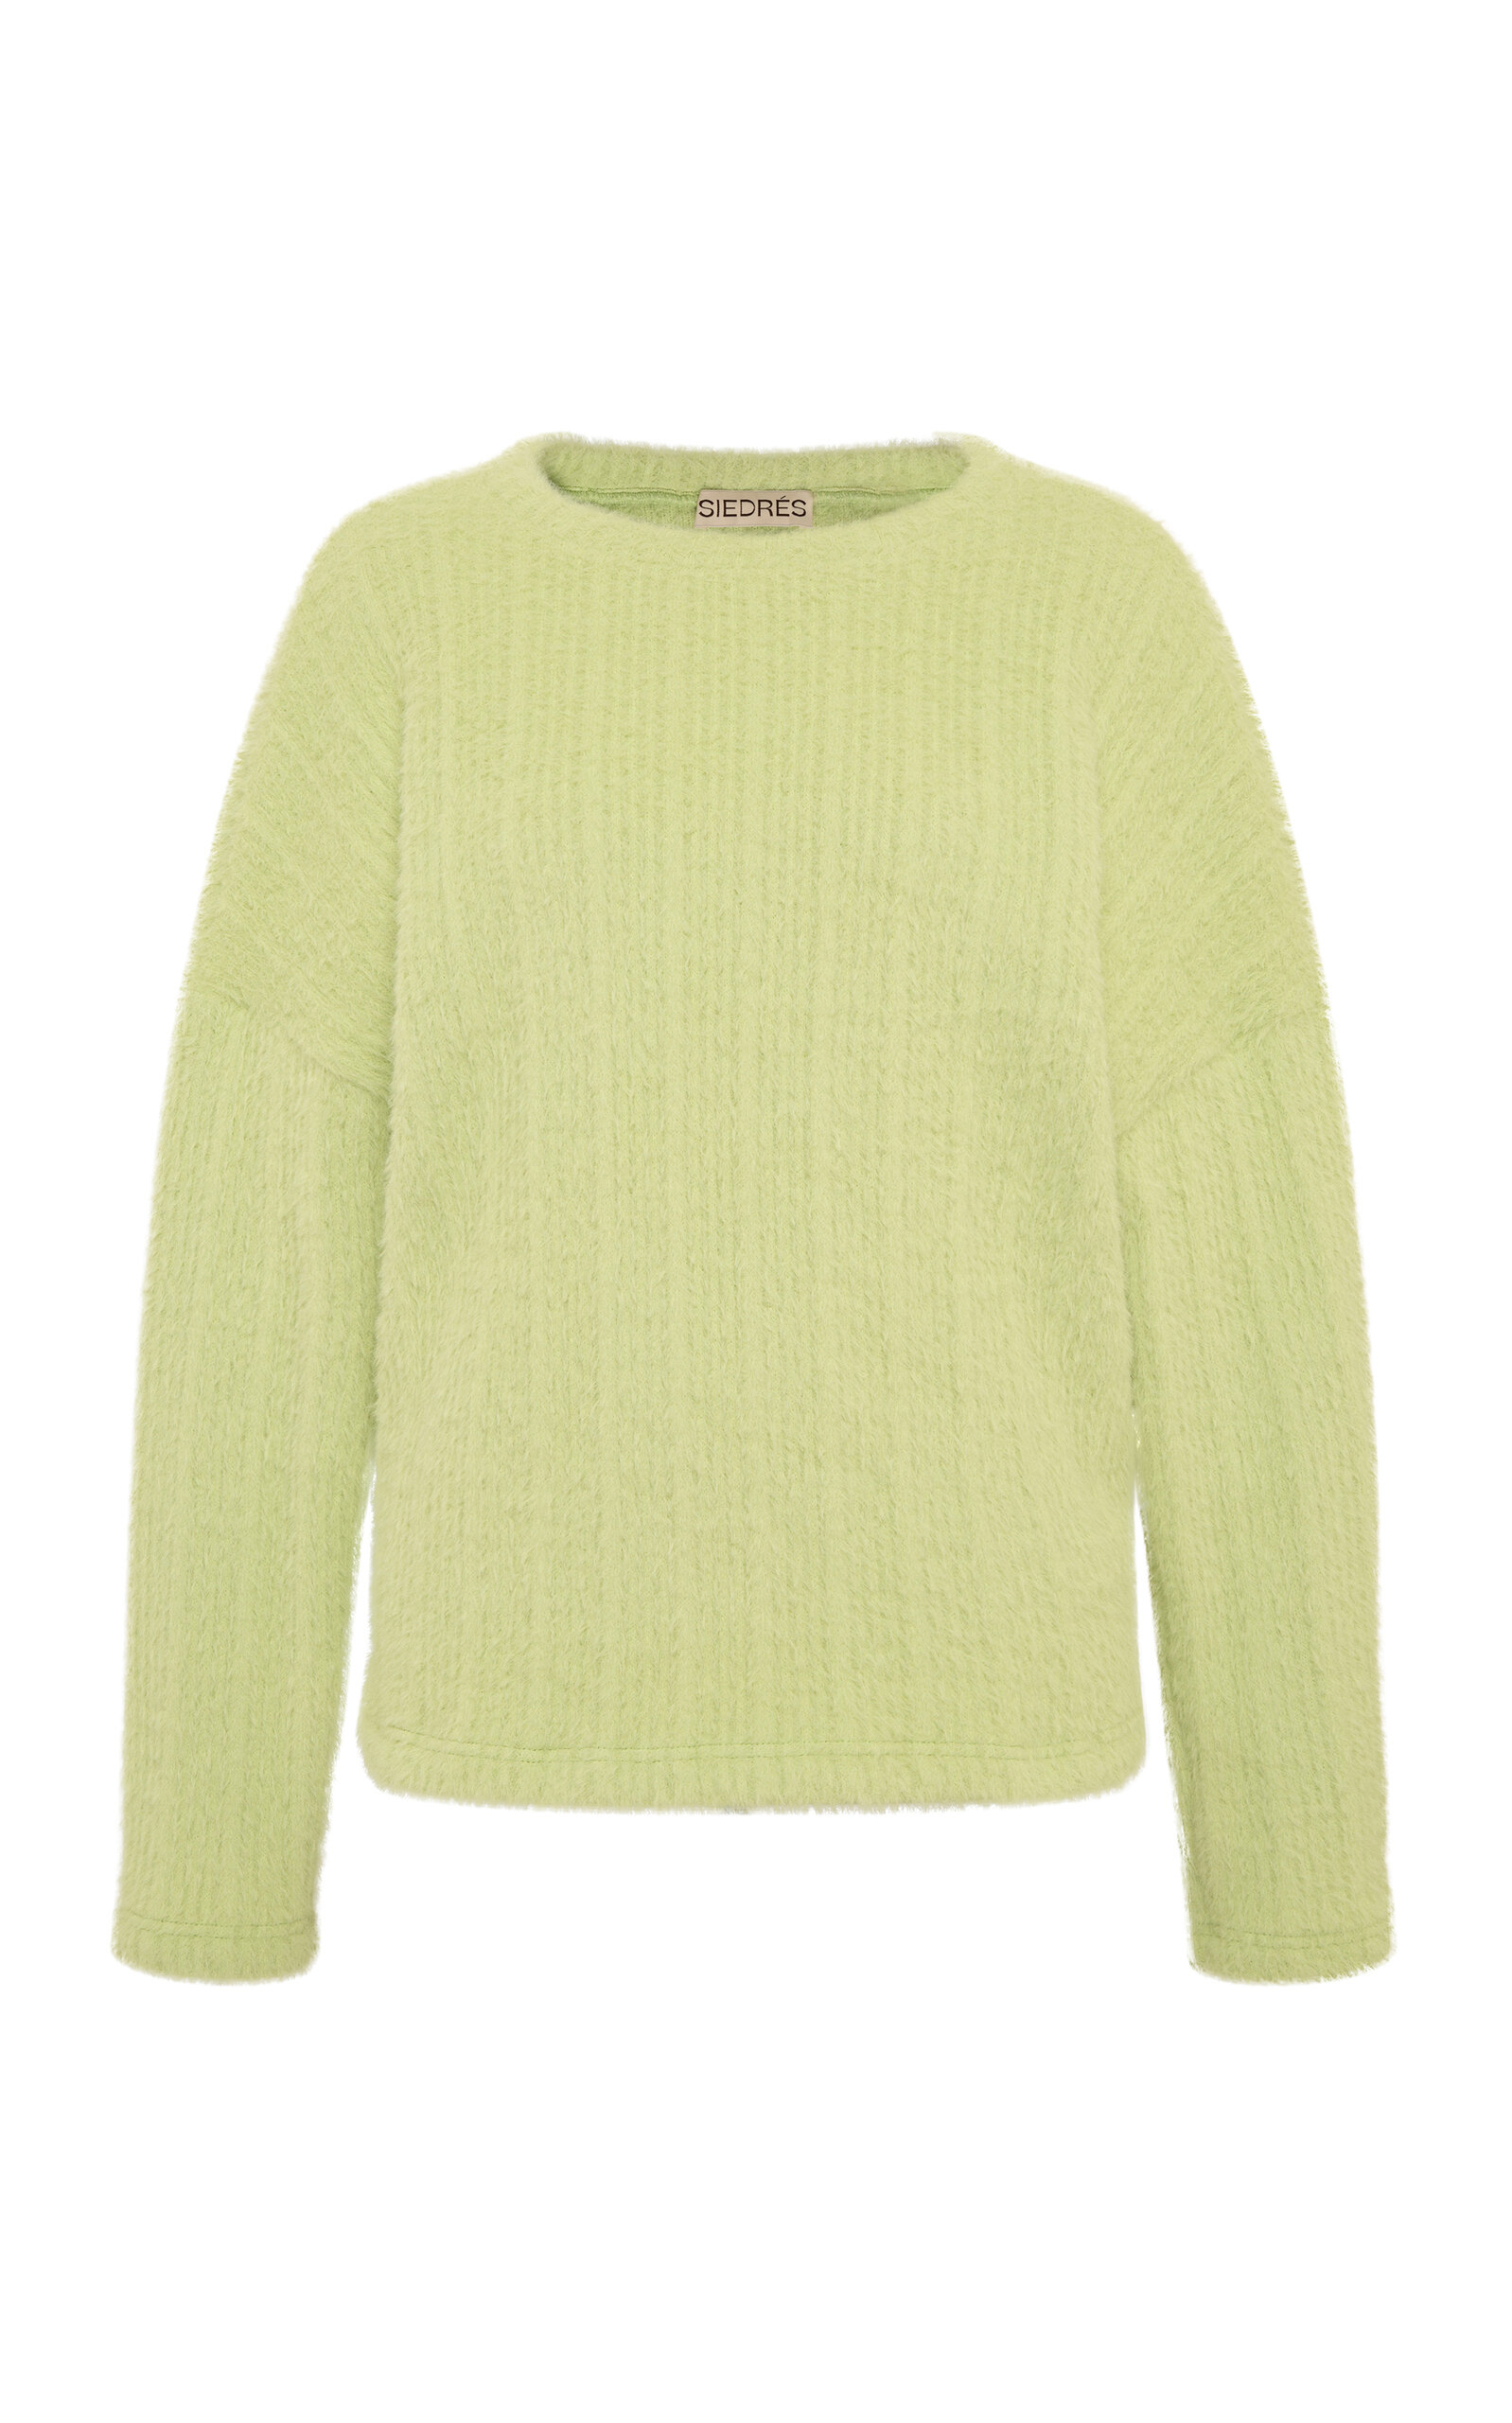 Siedres Mic Logo-appliqué Detailed Crewneck Knit Sweater In Lime Green